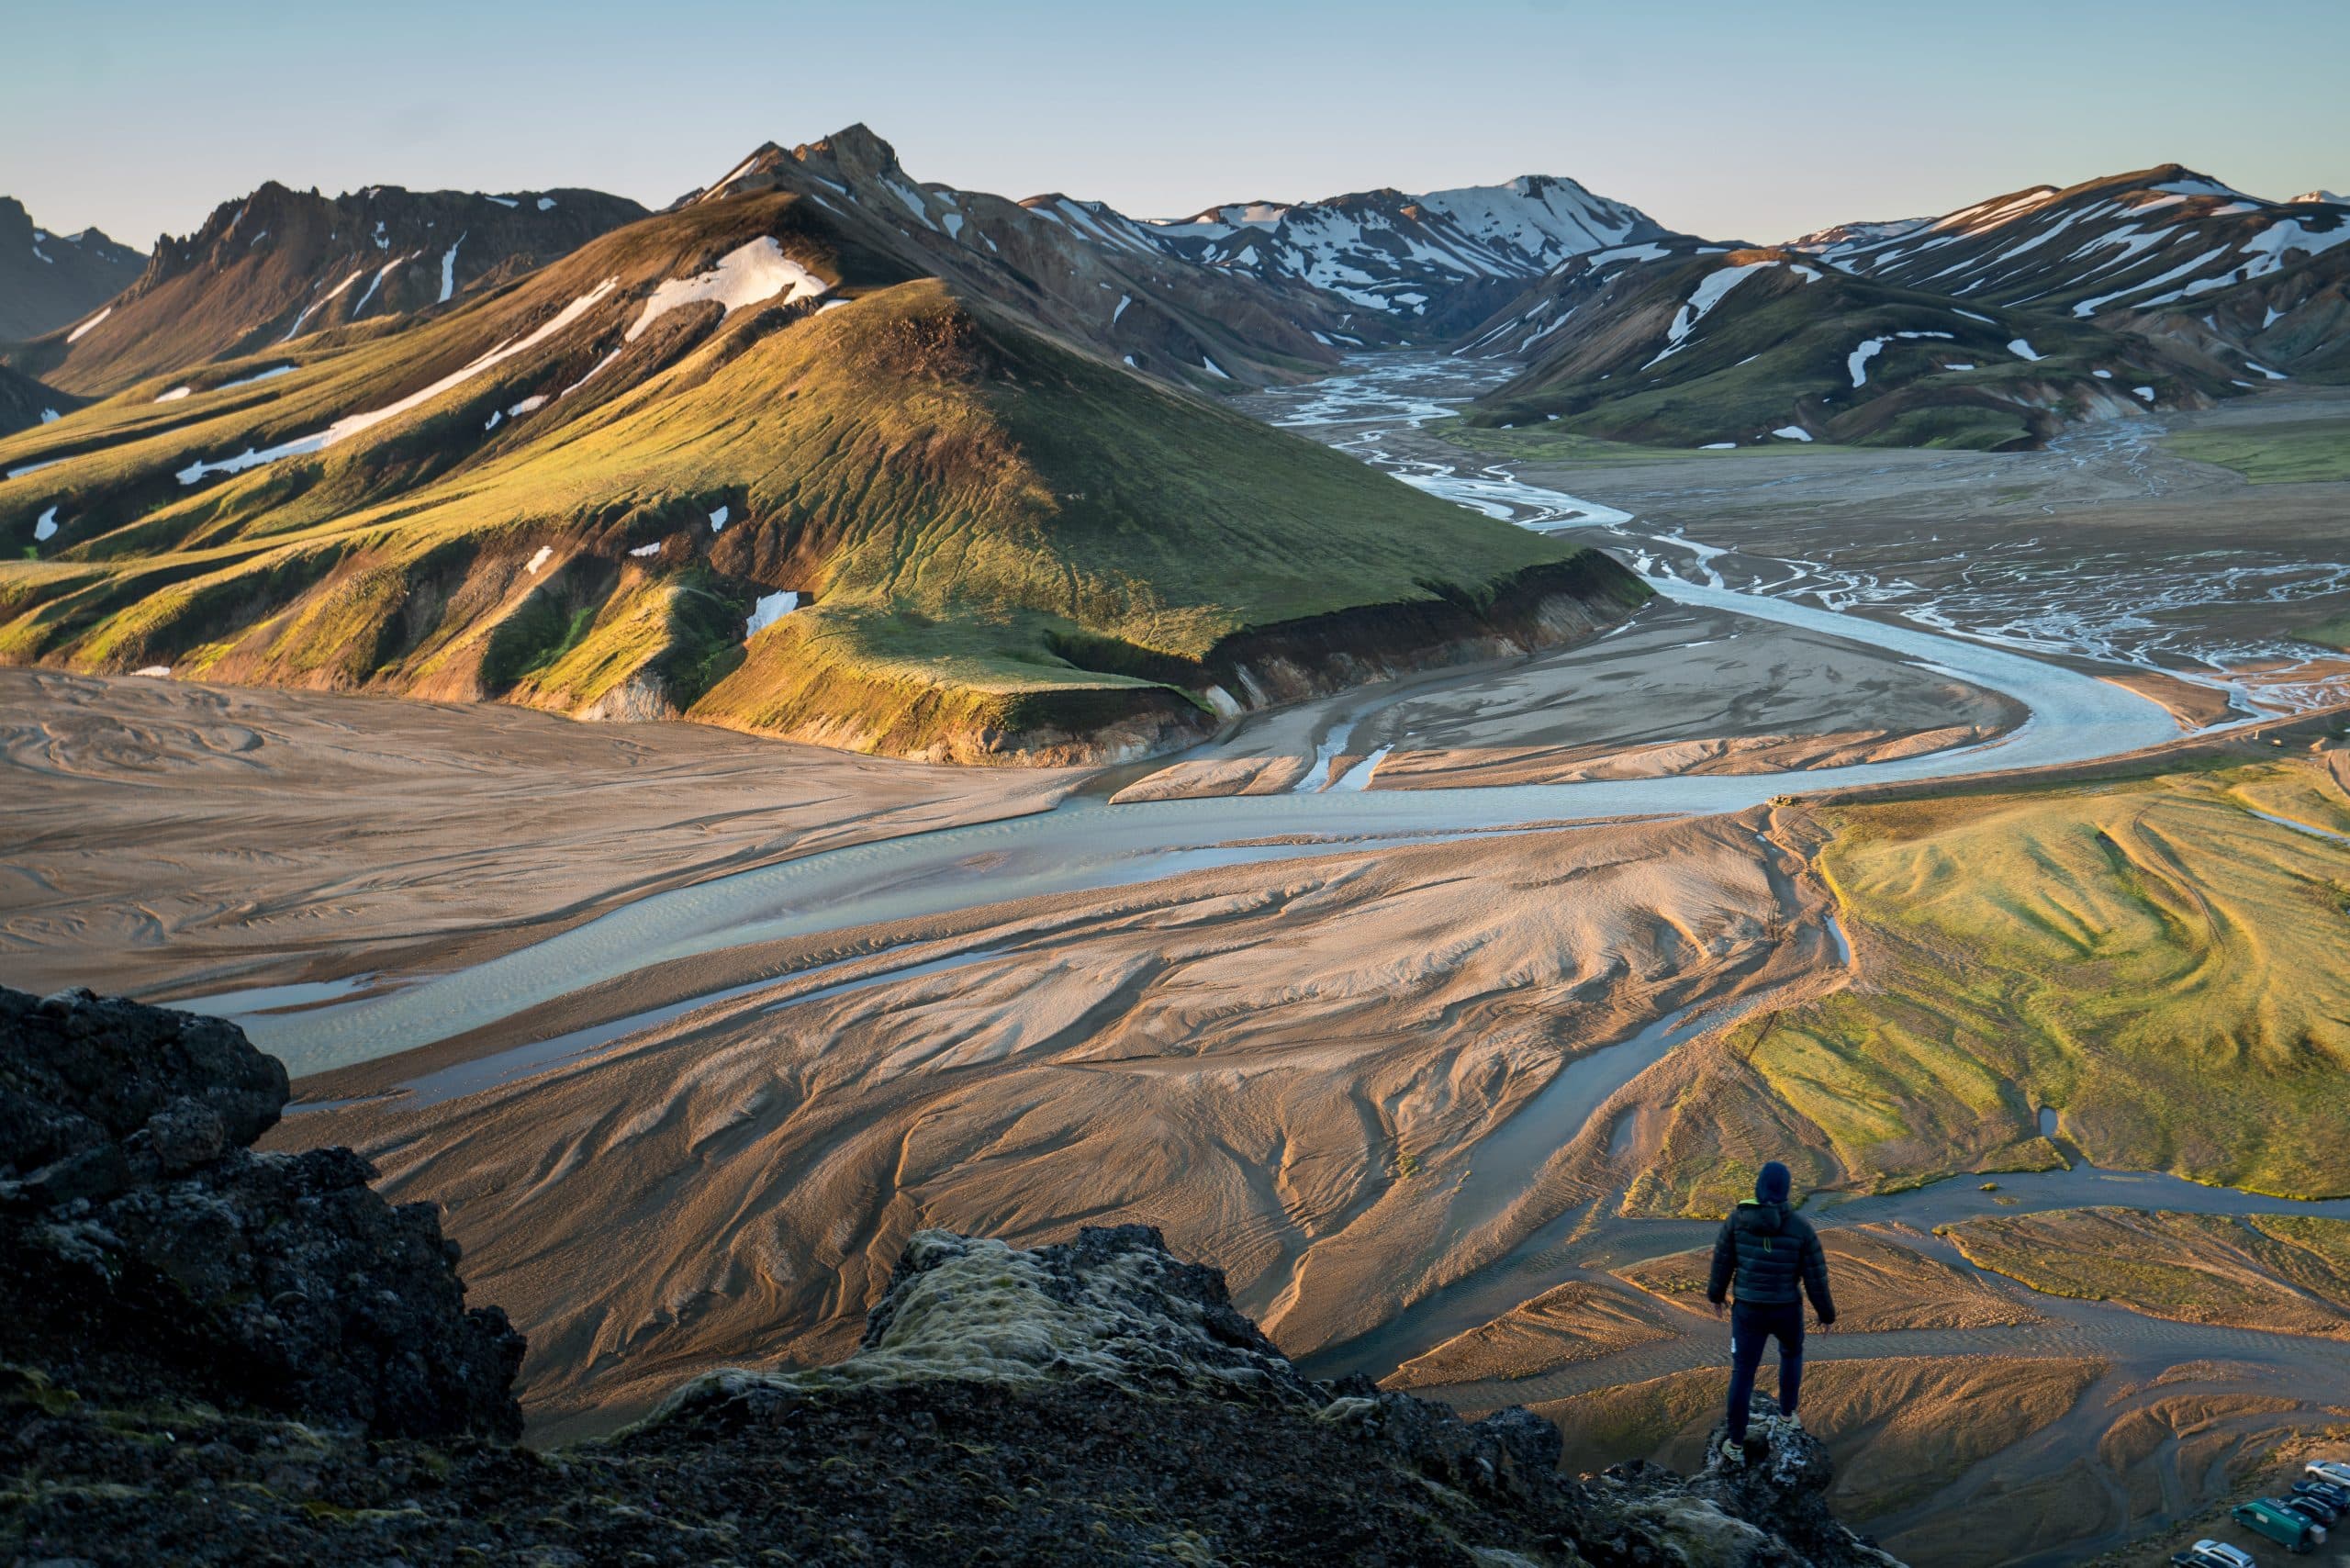 A view over a river at the Landmannalaugar Region in the Icelandic Highlands.